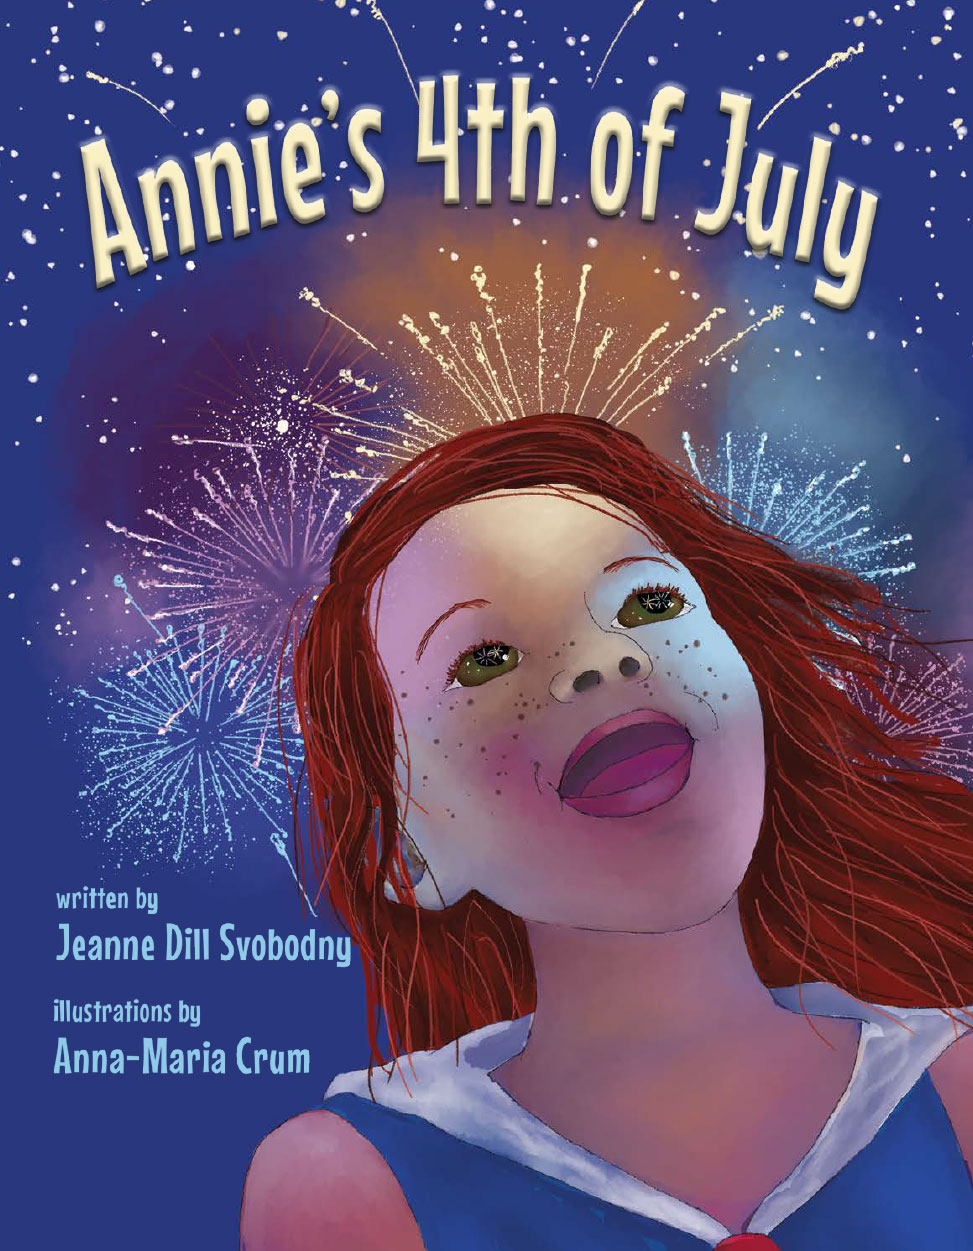 "Annie's 4th of July" By Jeanne Dill Svobodny Book Cover